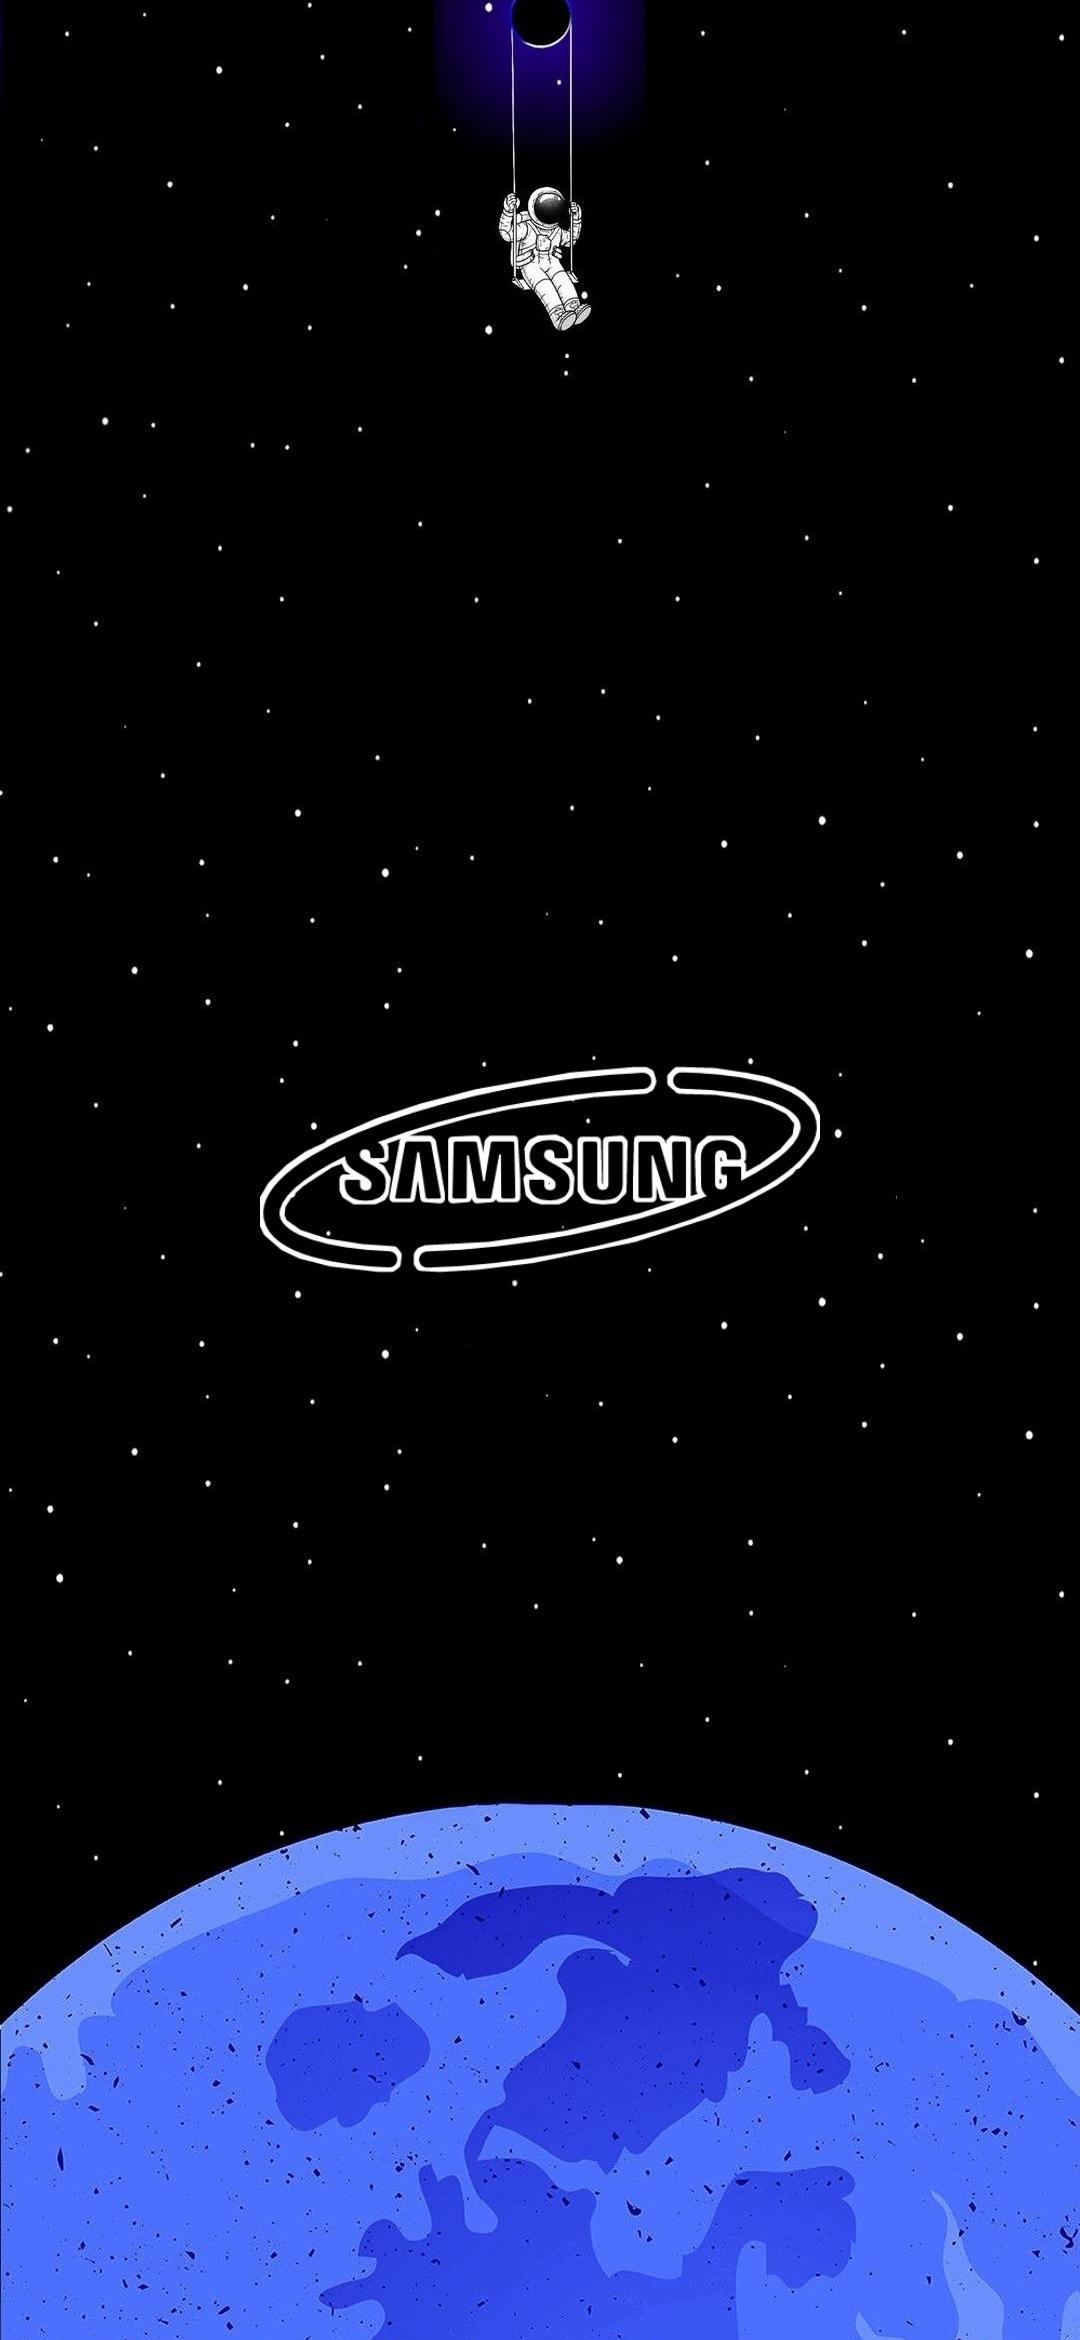  Samsung Galaxy S24 Hintergrundbild 1080x2340. Just thought this was a really good looking wallpaper for samsung fans (like me) it also comes with the holepunch astronaut for a bonus